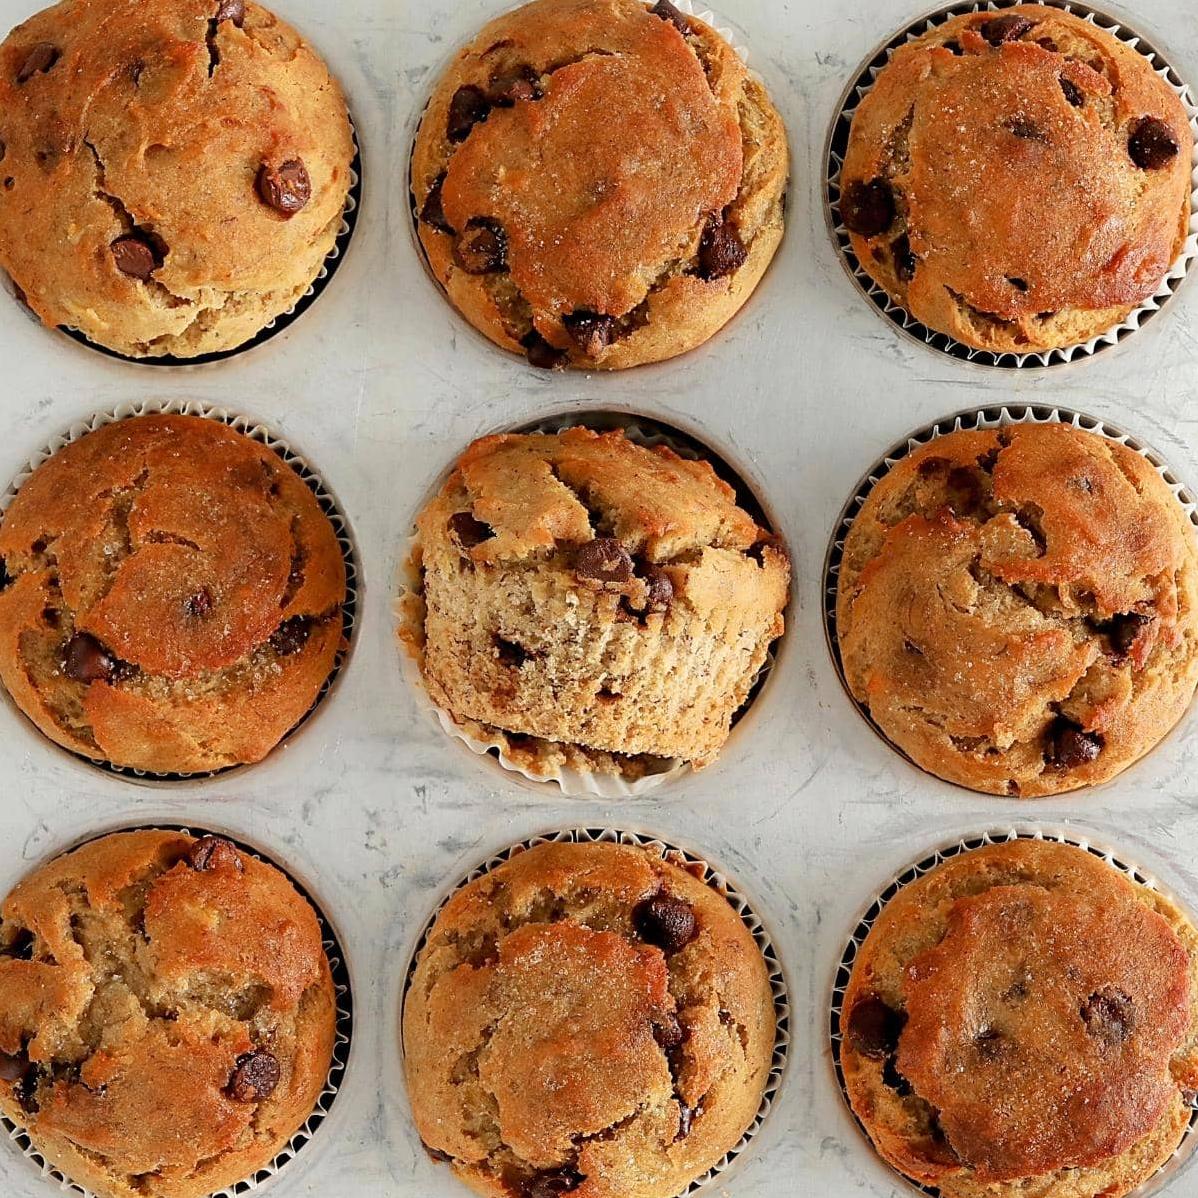  Say goodbye to gluten-filled muffins and hello to these scrumptious gluten-free banana muffins.